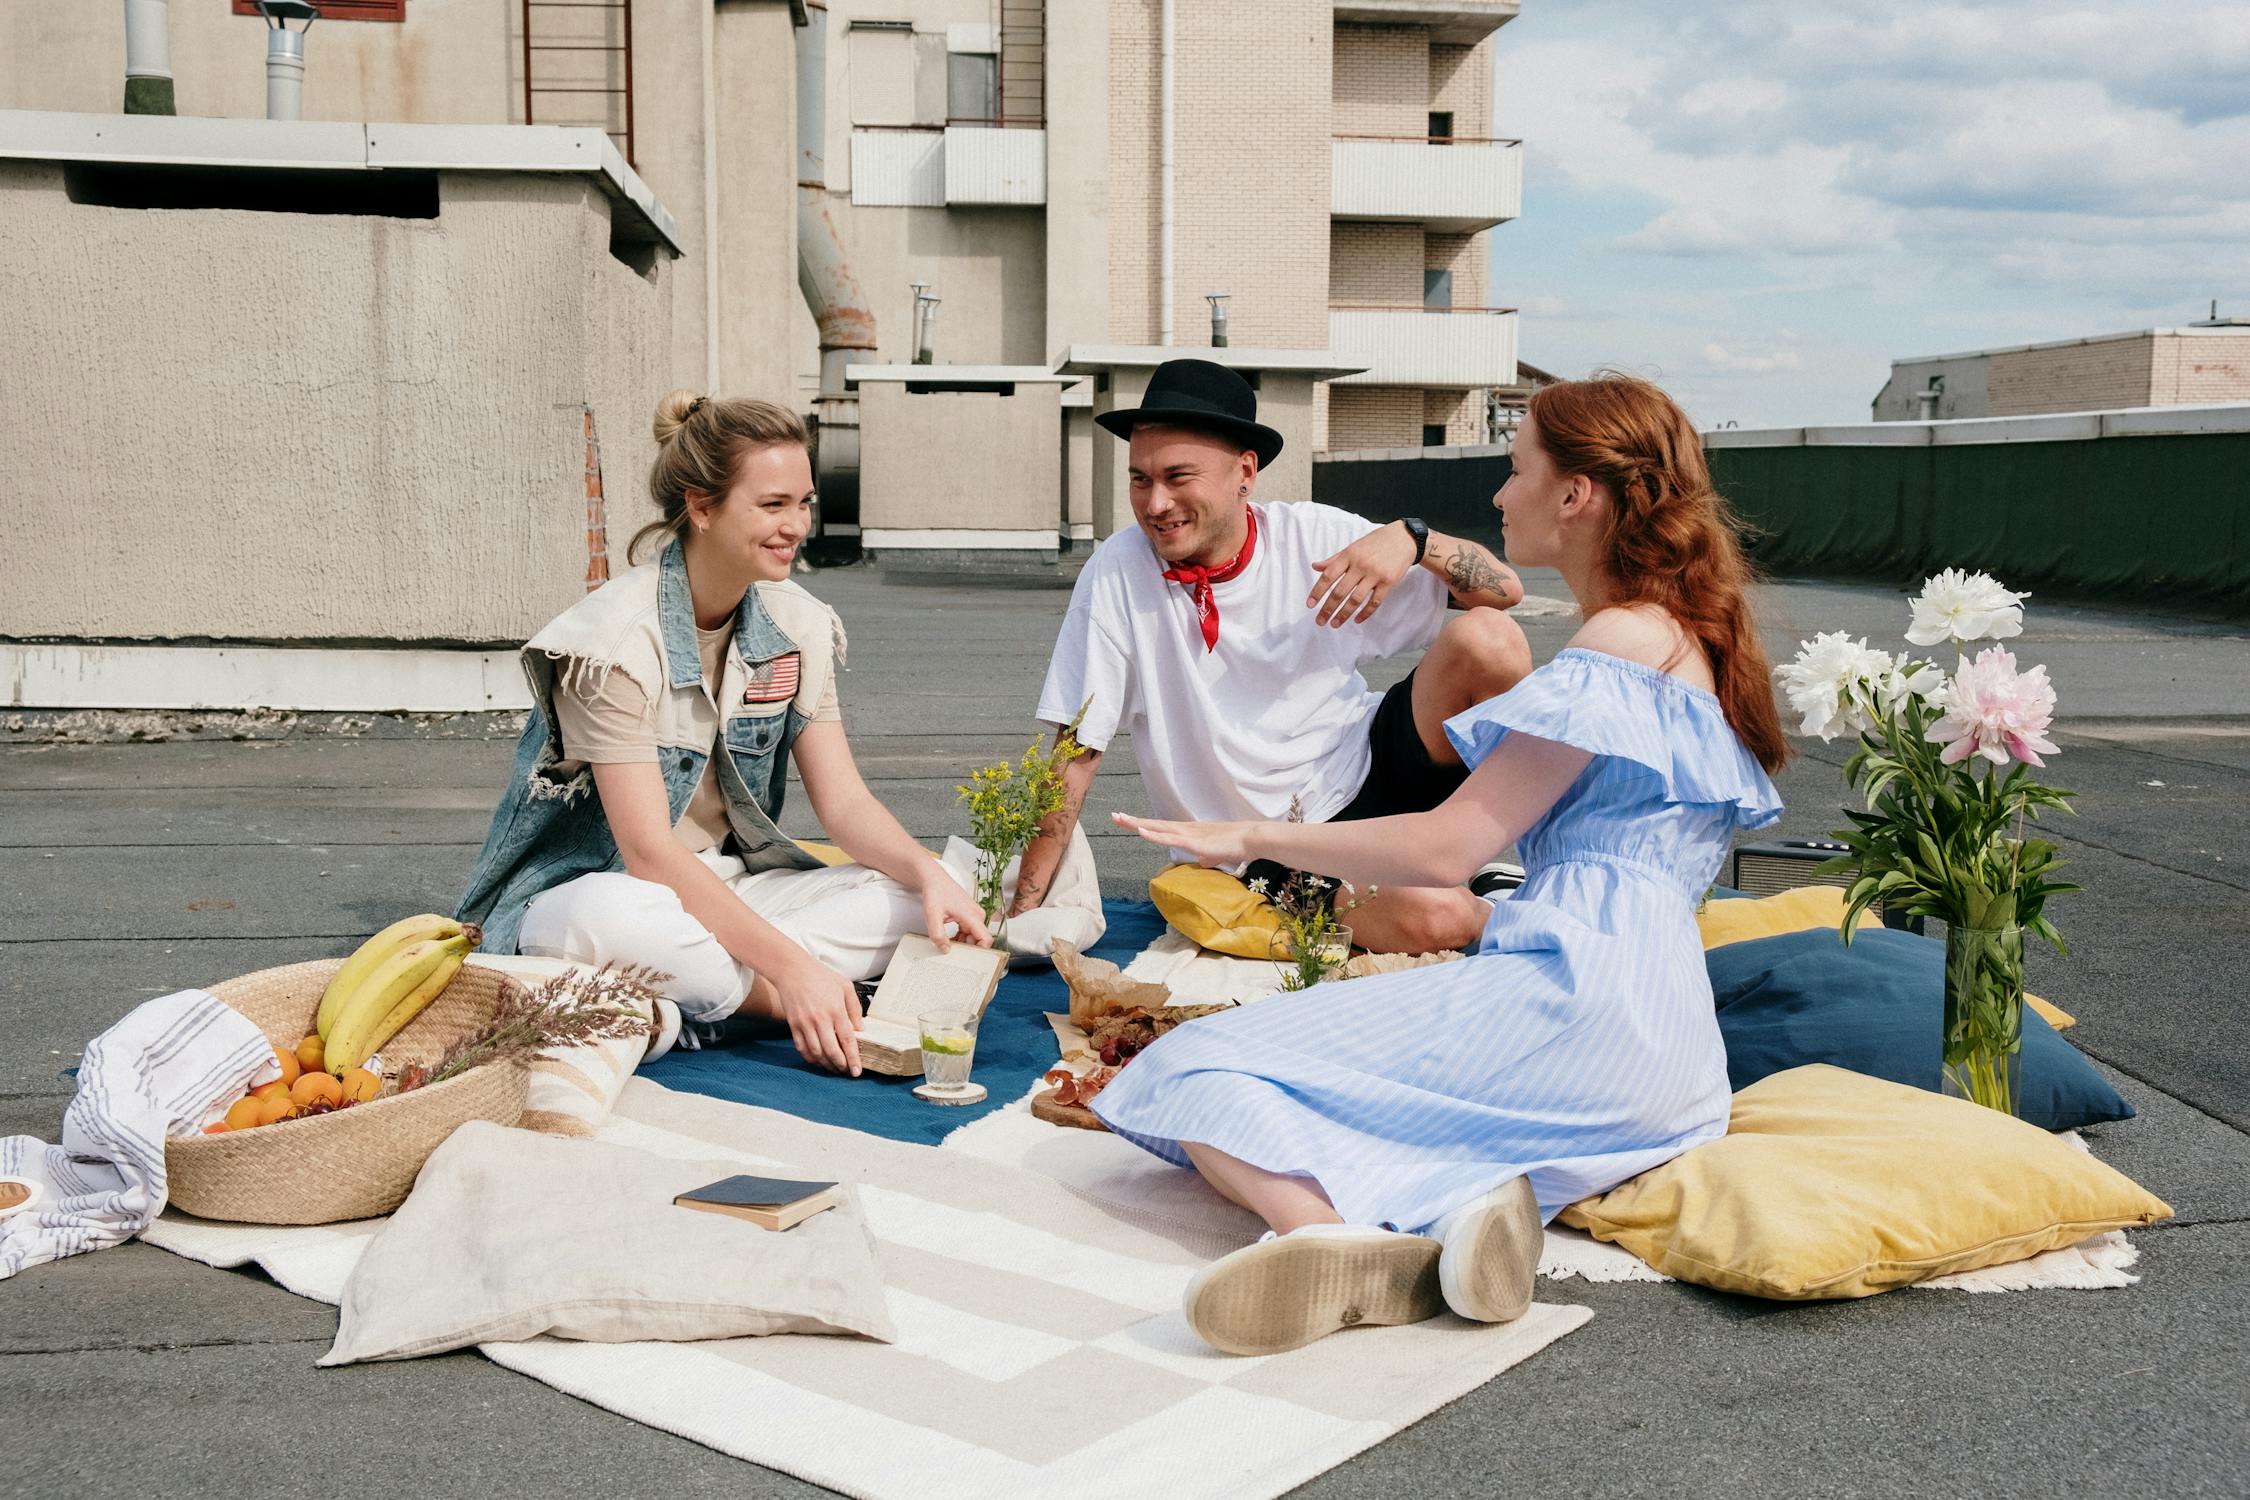 friends having a picnic on a rooftop wearing airy clothes, blue dress, and hat to shield from sun